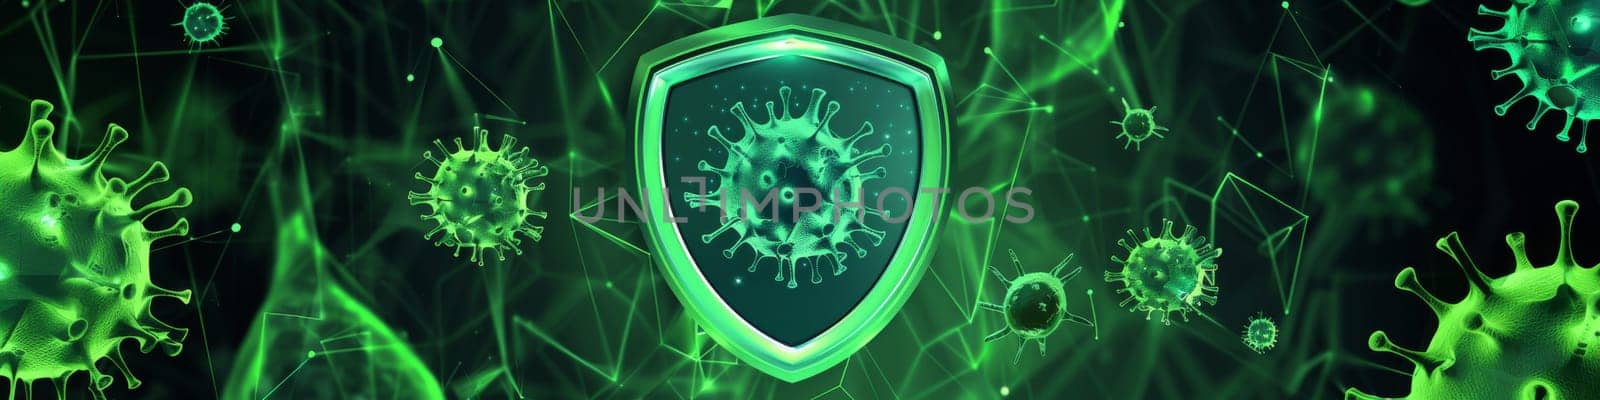 Green shield protection against a viruses around